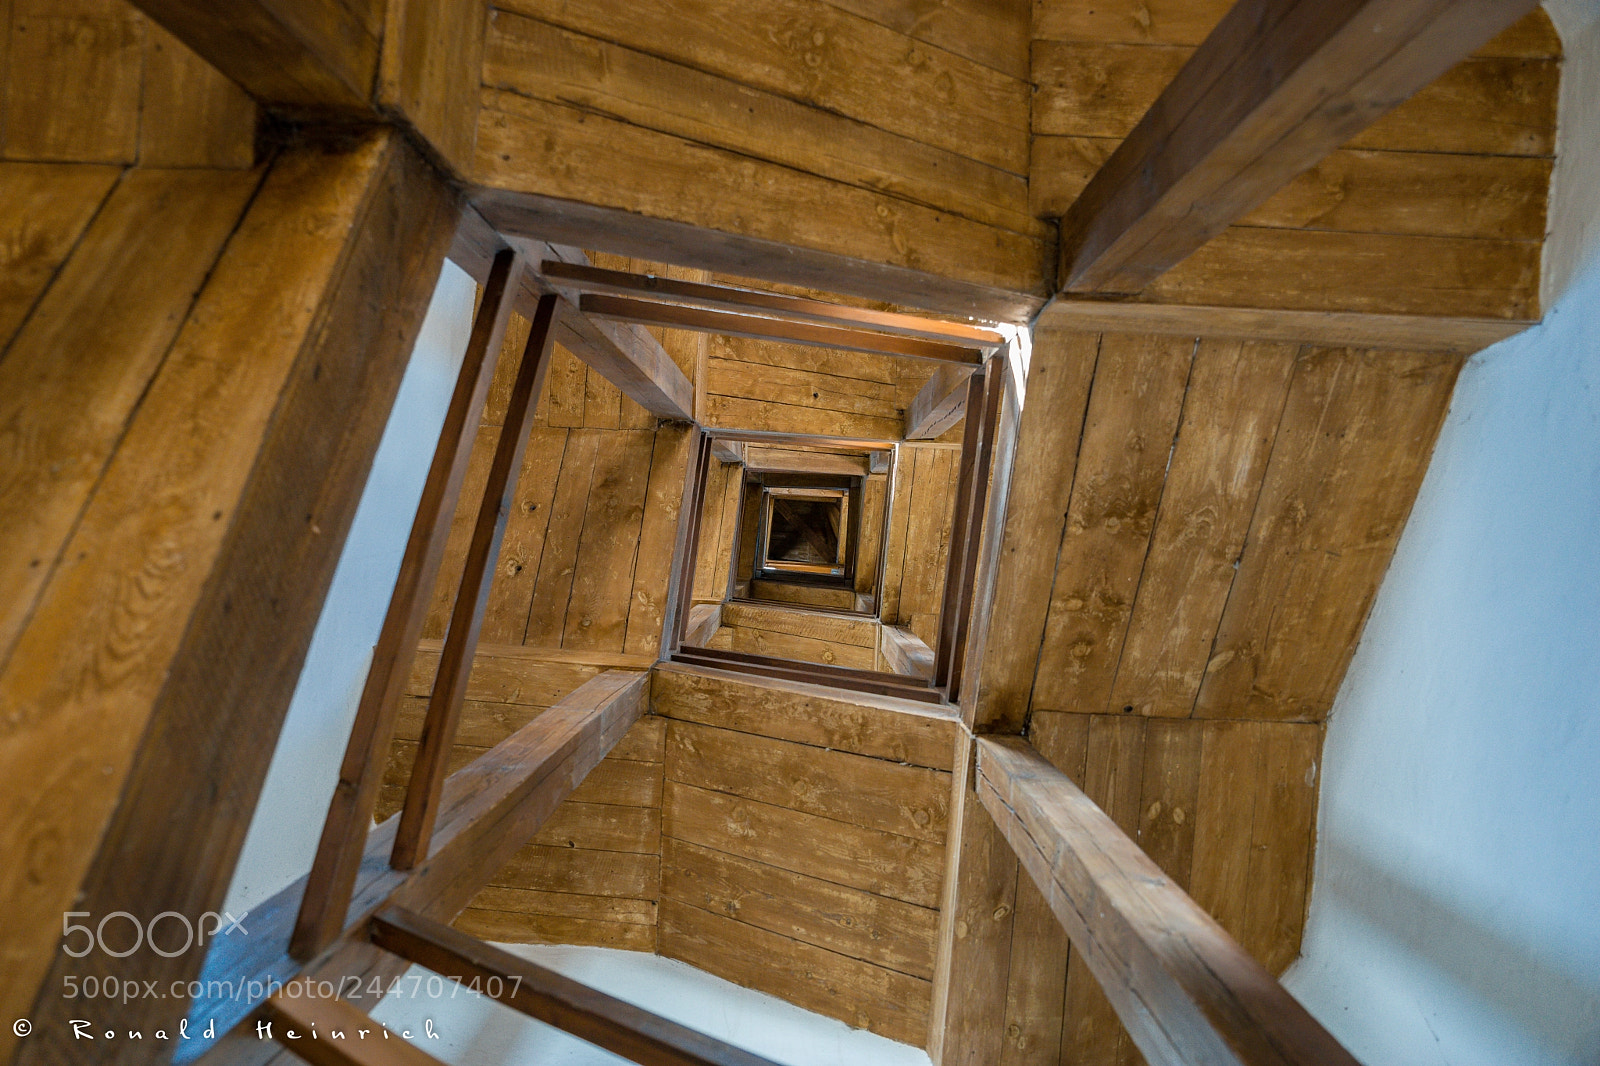 Sony a99 II sample photo. Cadolzburg tower upstairs photography